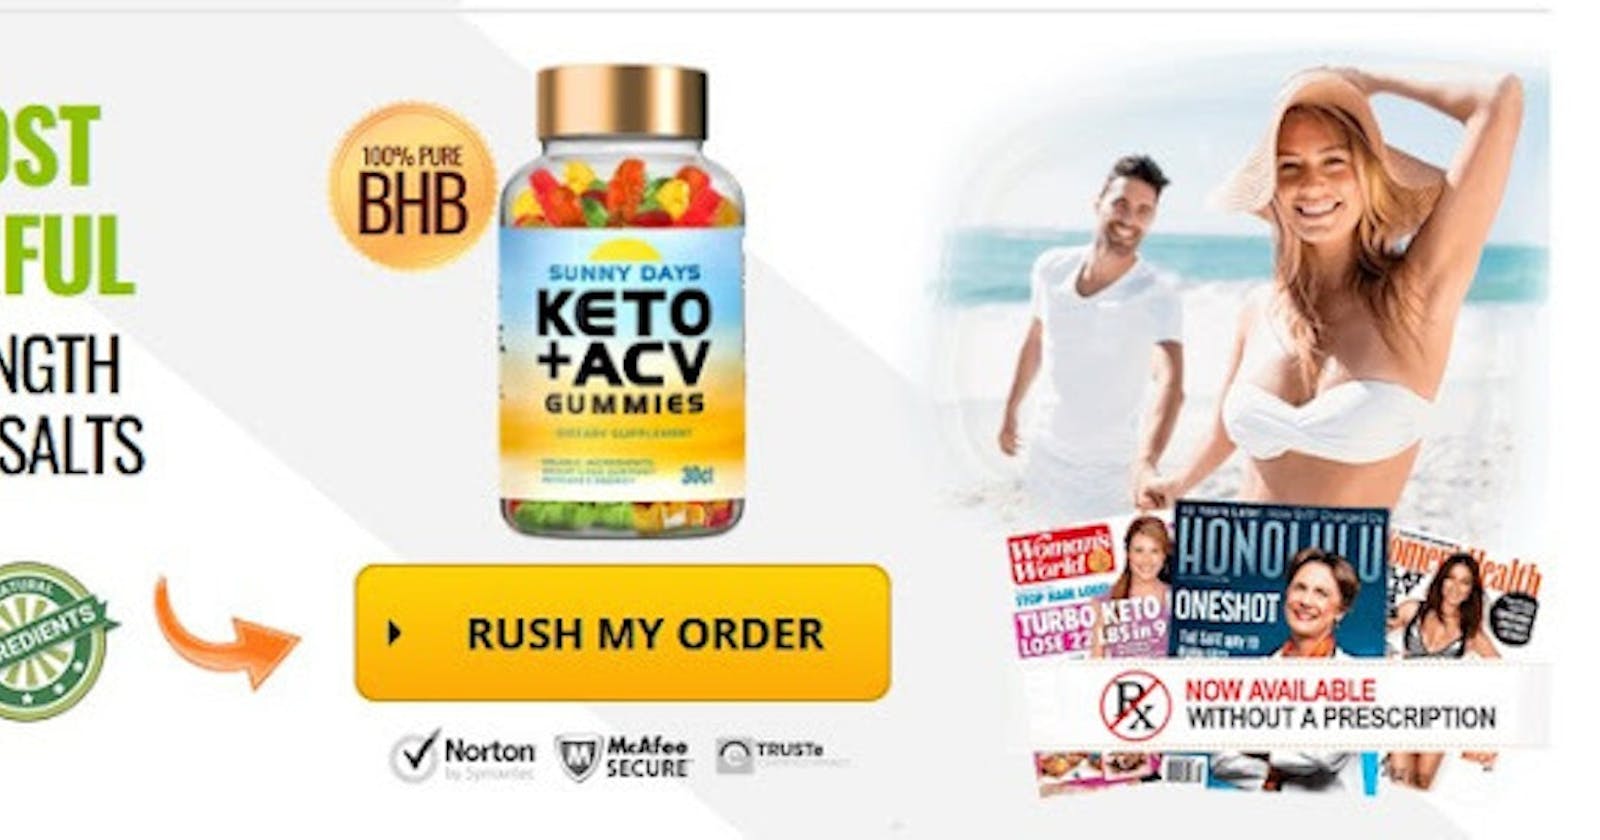 Sunny Days Keto + ACV Gummies Pills: Everything Consumers Need to Know About Pills Includes Apple Cider Vinegar goBHB Exogenous Ketones Advanced Ketog